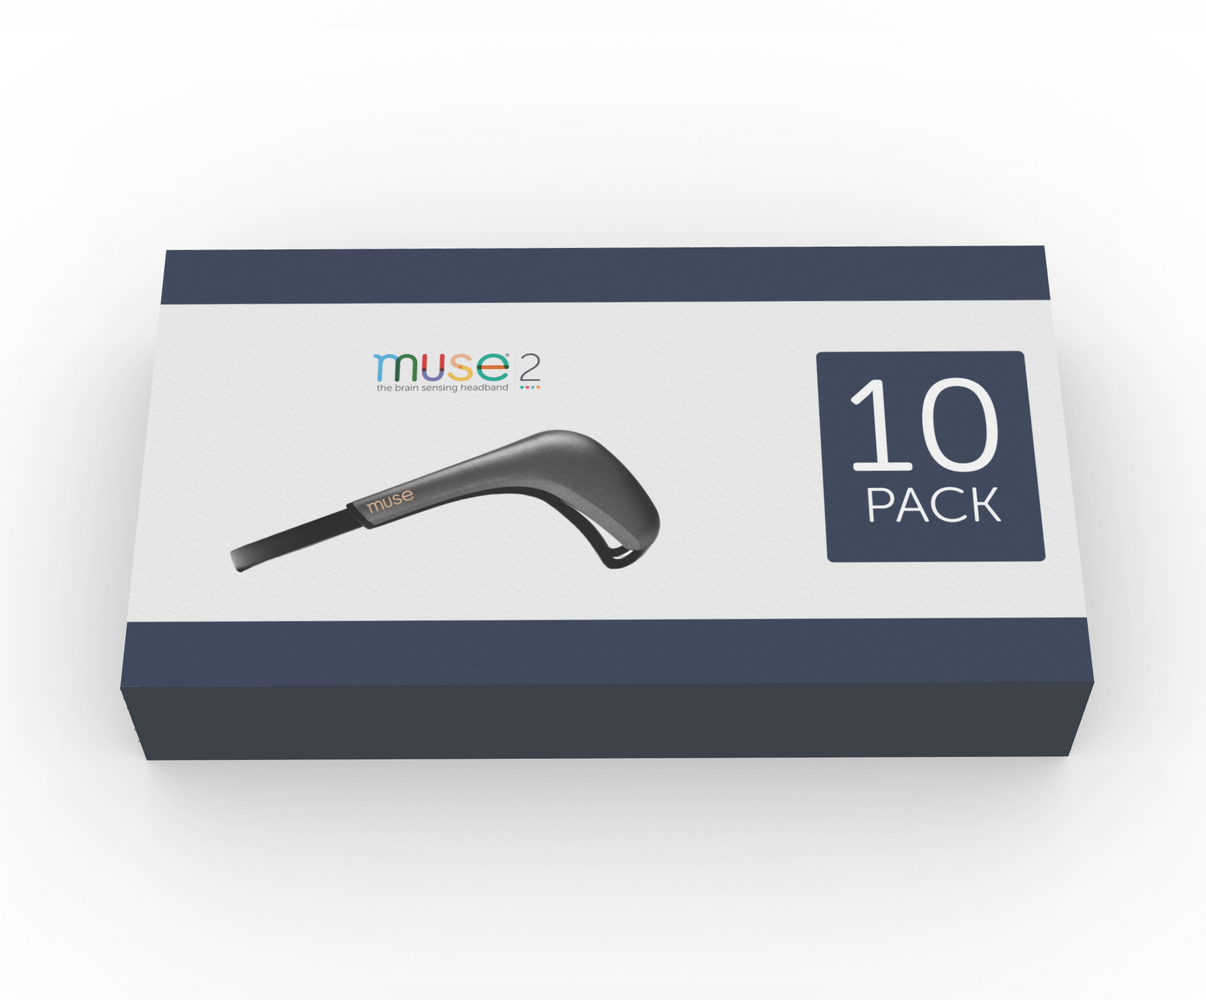 Muse 2 - 10 Pack